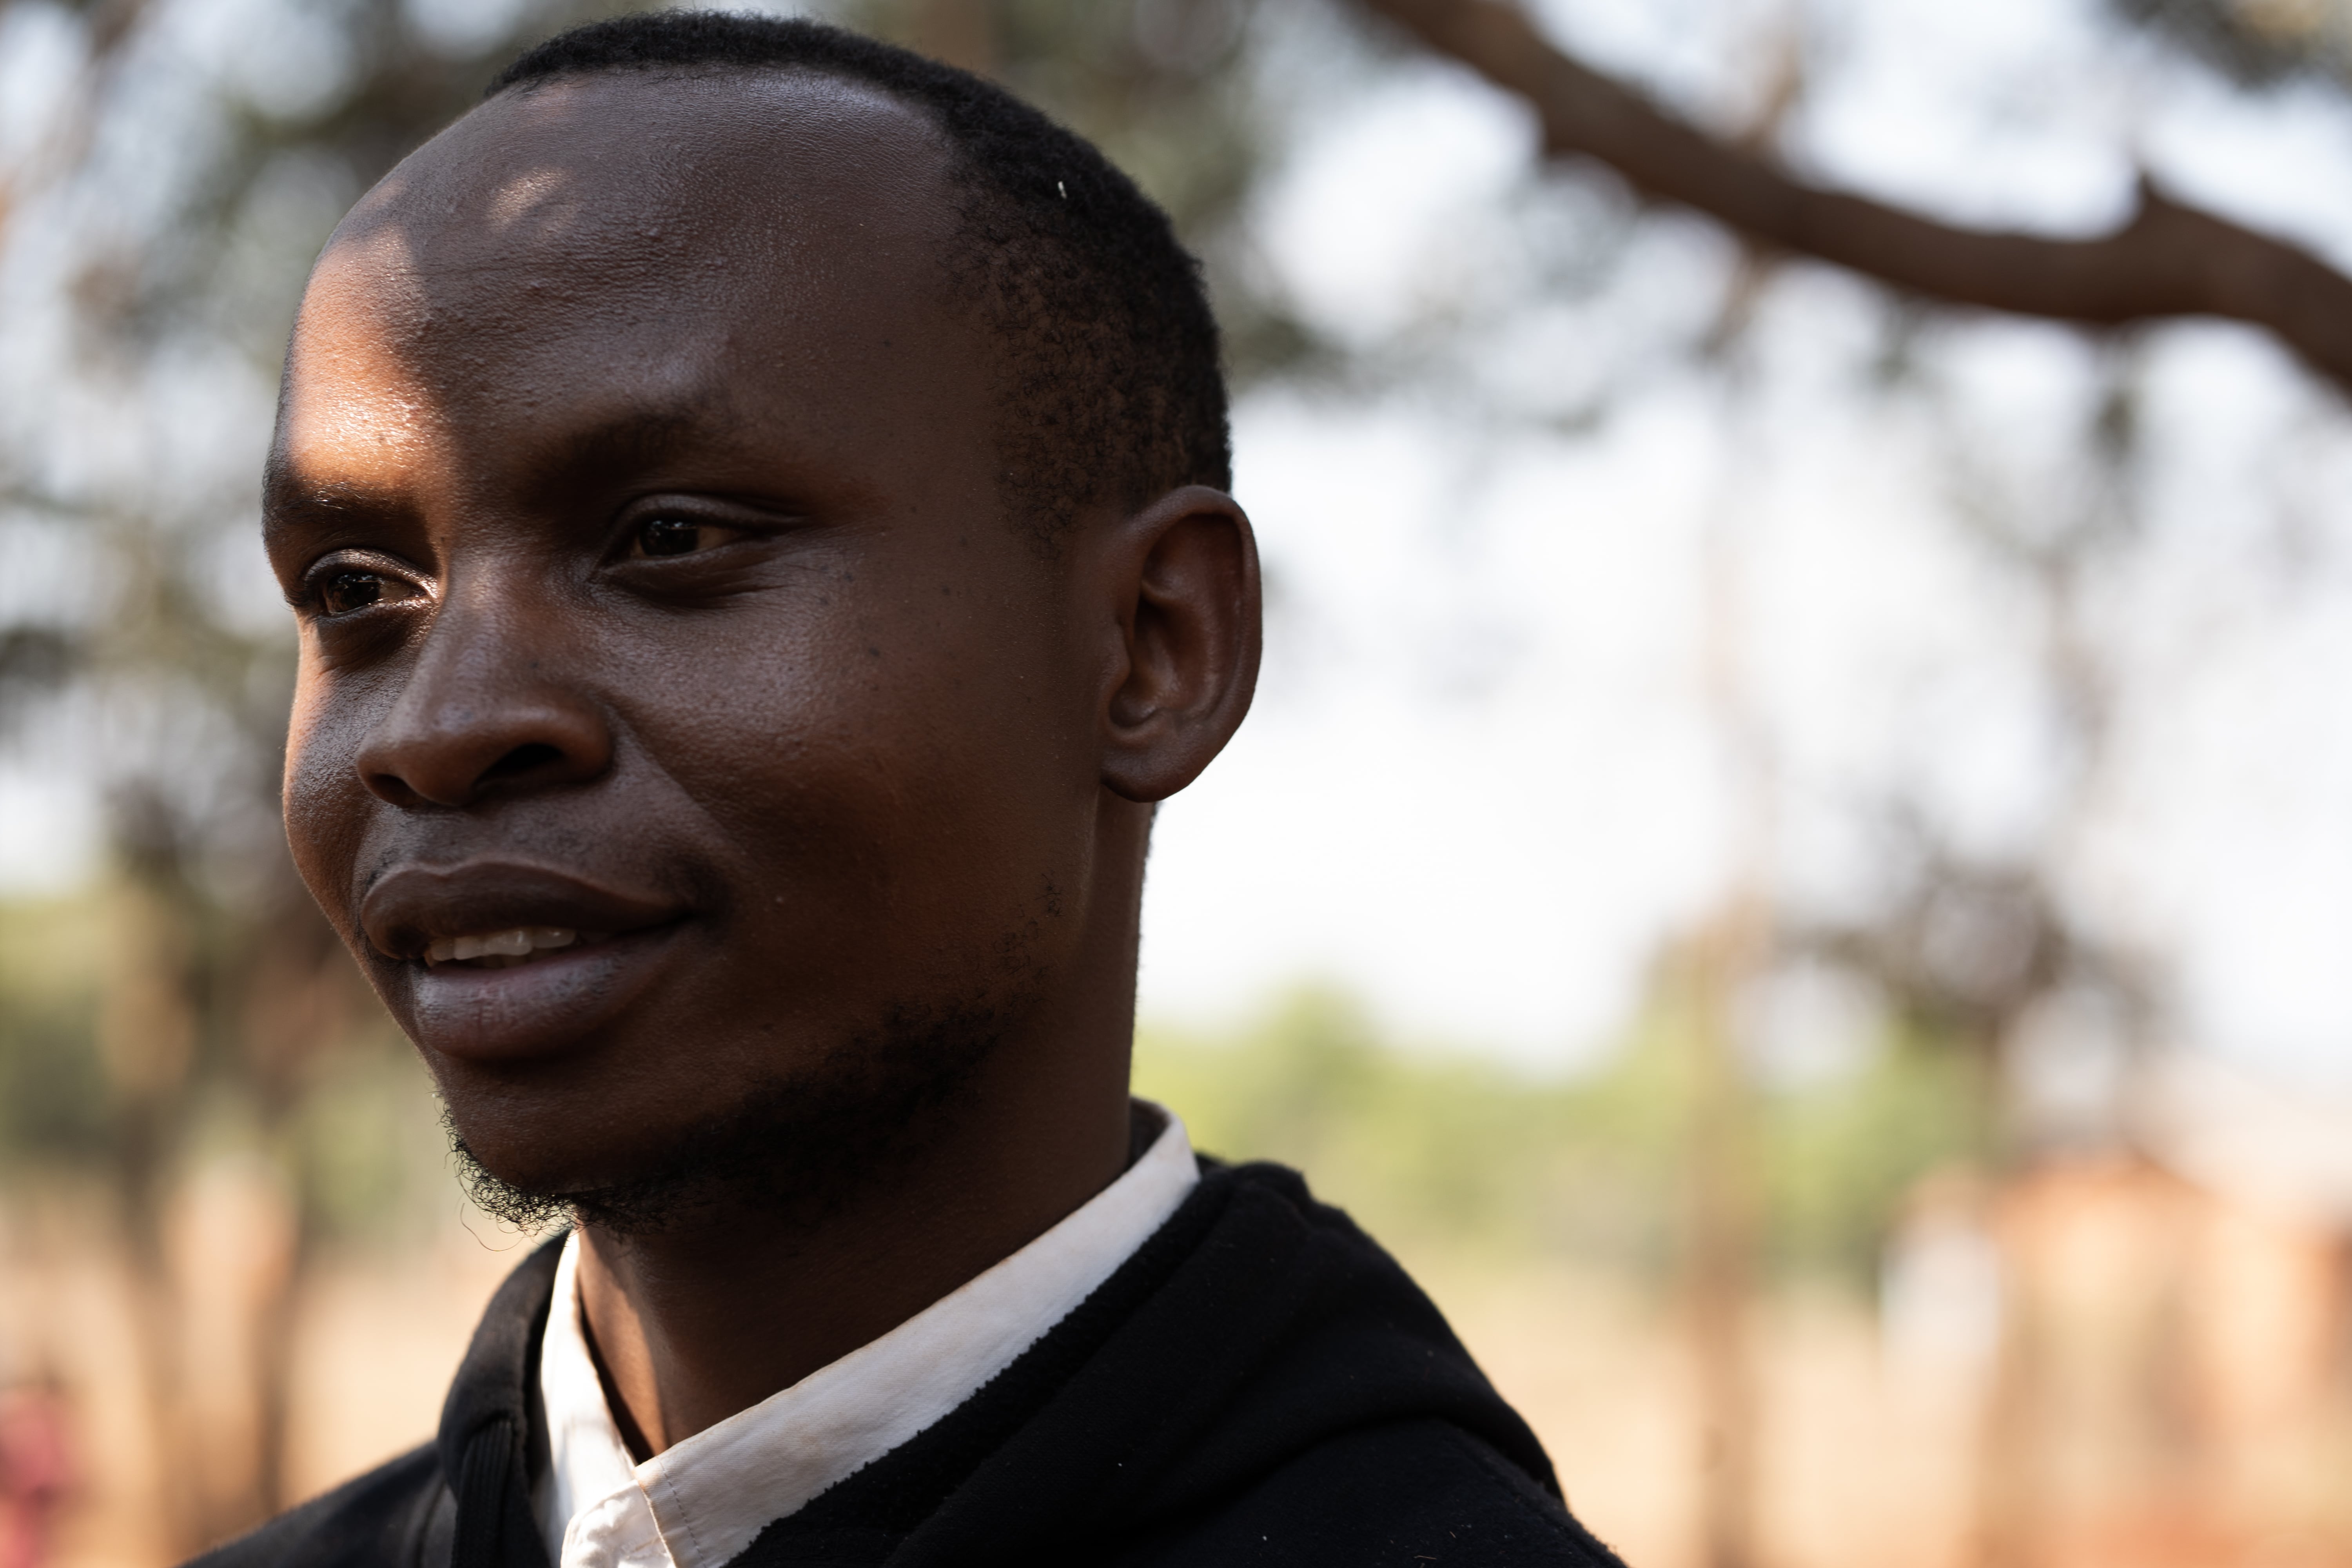 ‘My dream is to help people help themselves. I envision that in 10 years, every village in this area will have animators to fight for their rights,’ Joseph, the program officer, said with a smile.months of training.